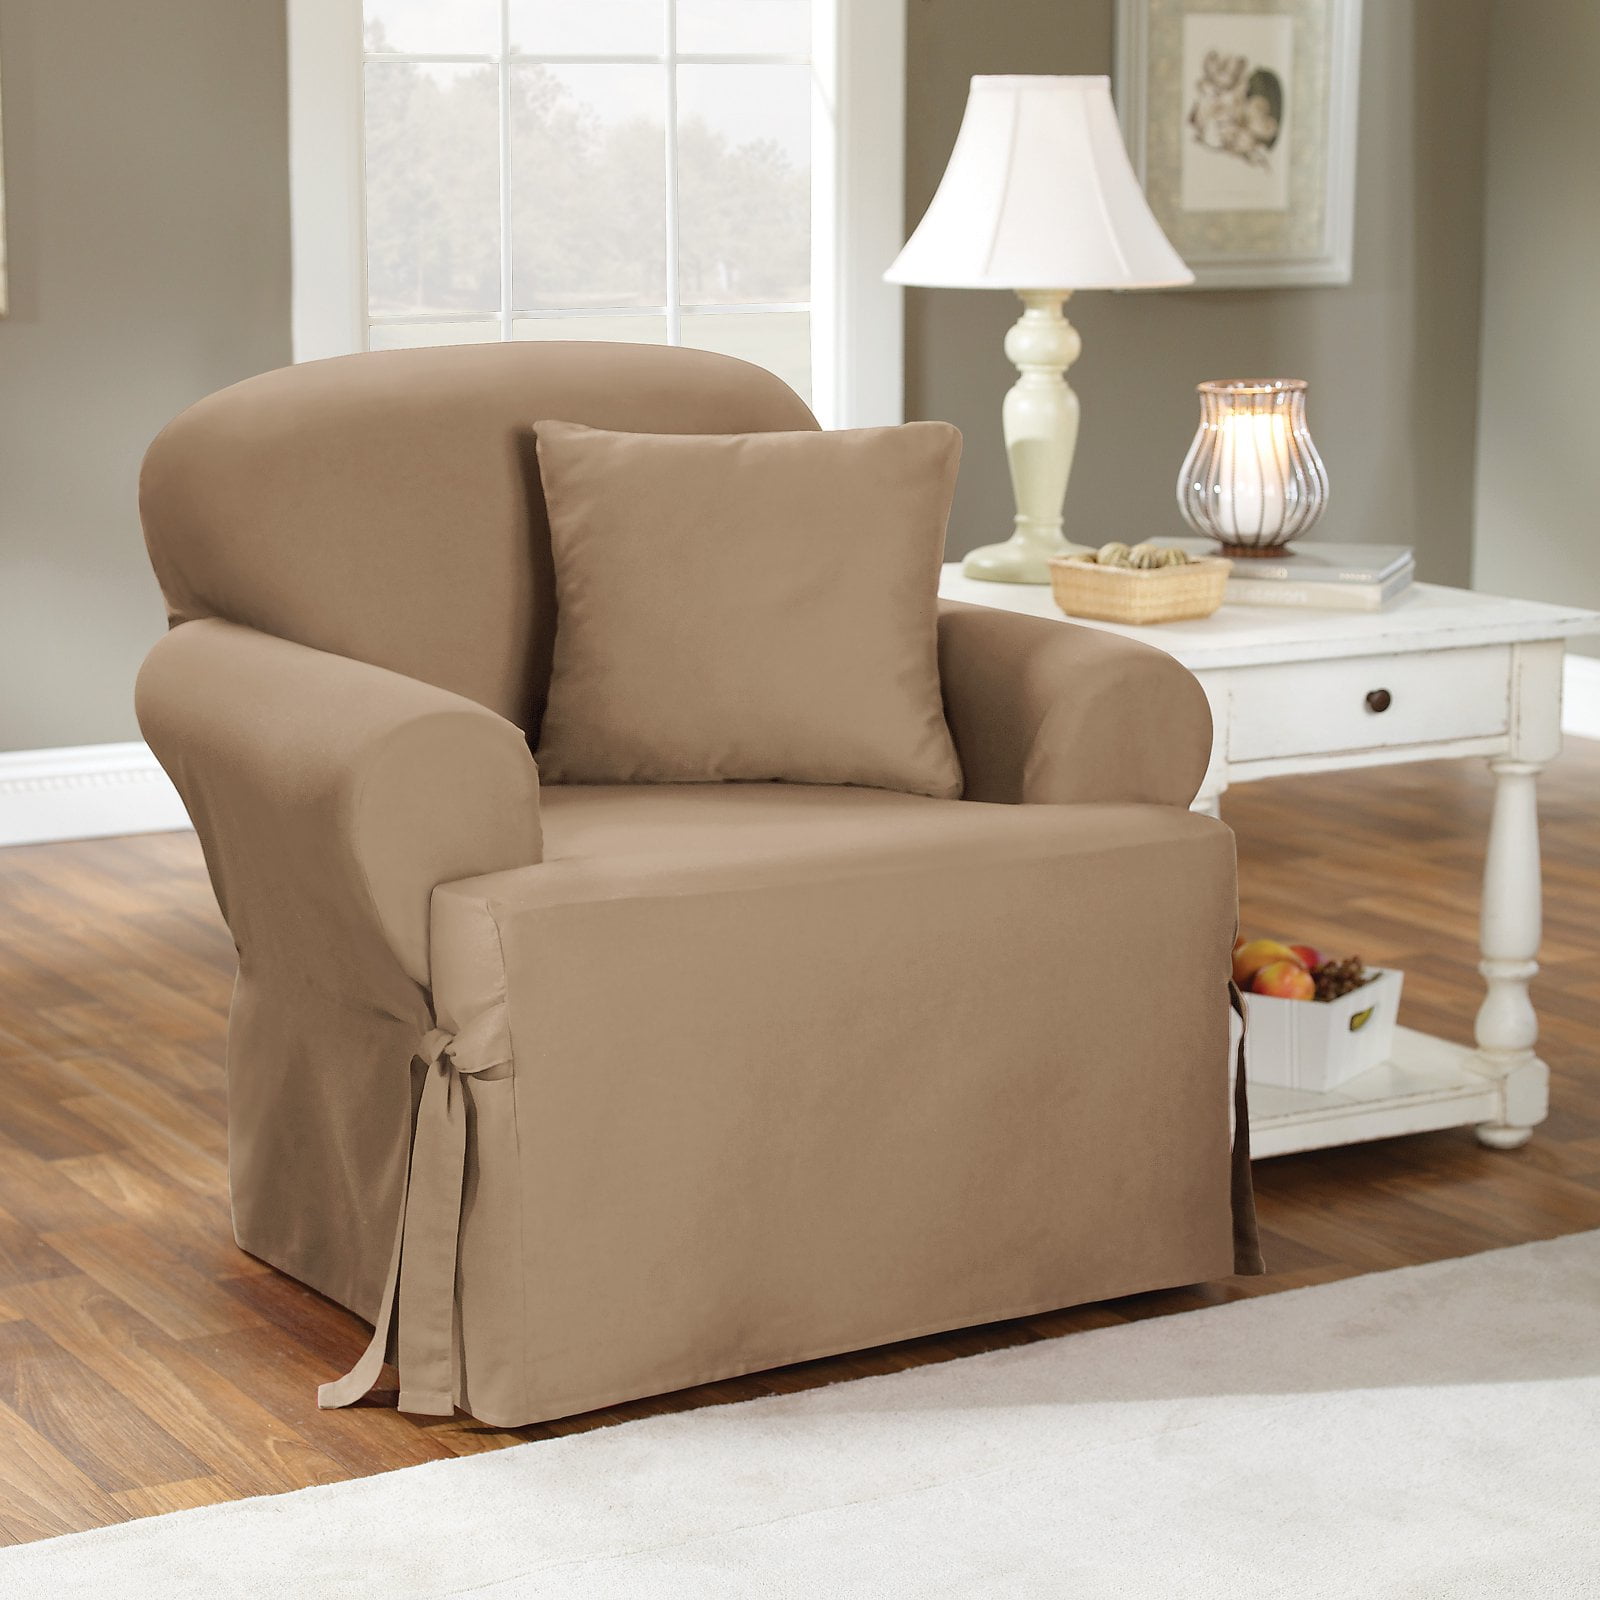 Sure Fit Cotton Duck T-Cushion Chair Slipcover